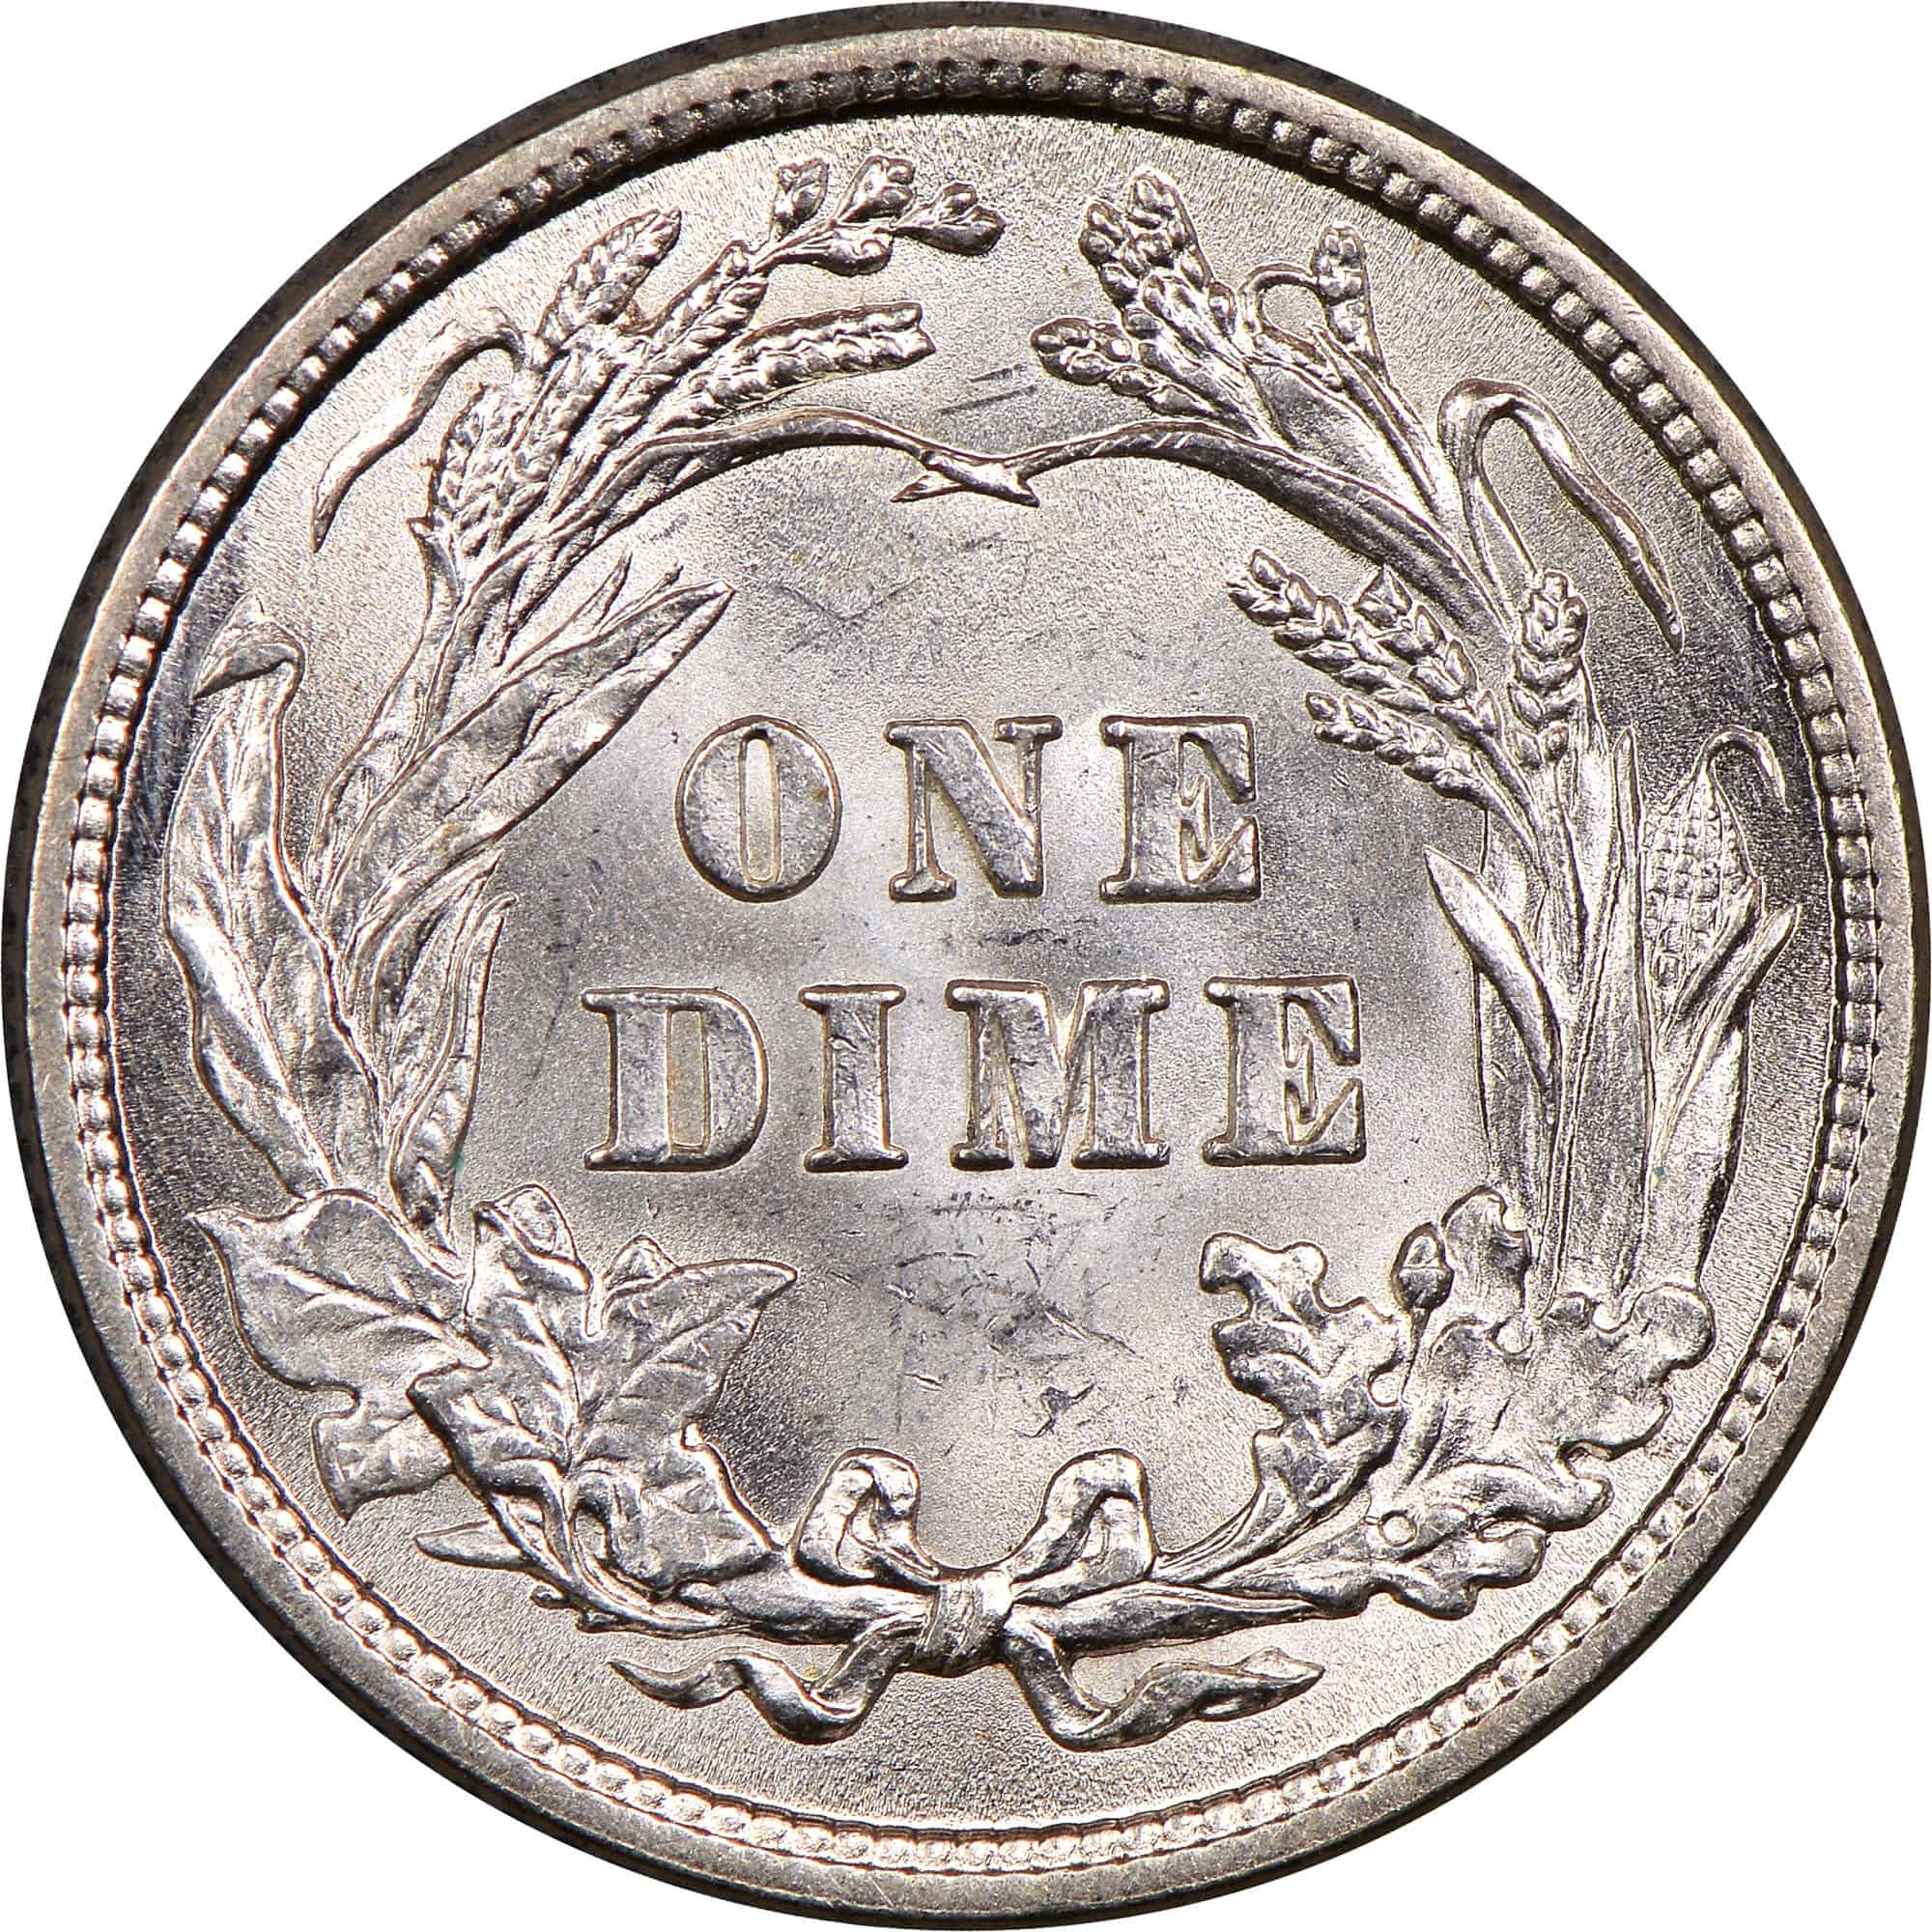 reverse of the 1916 Barber dime